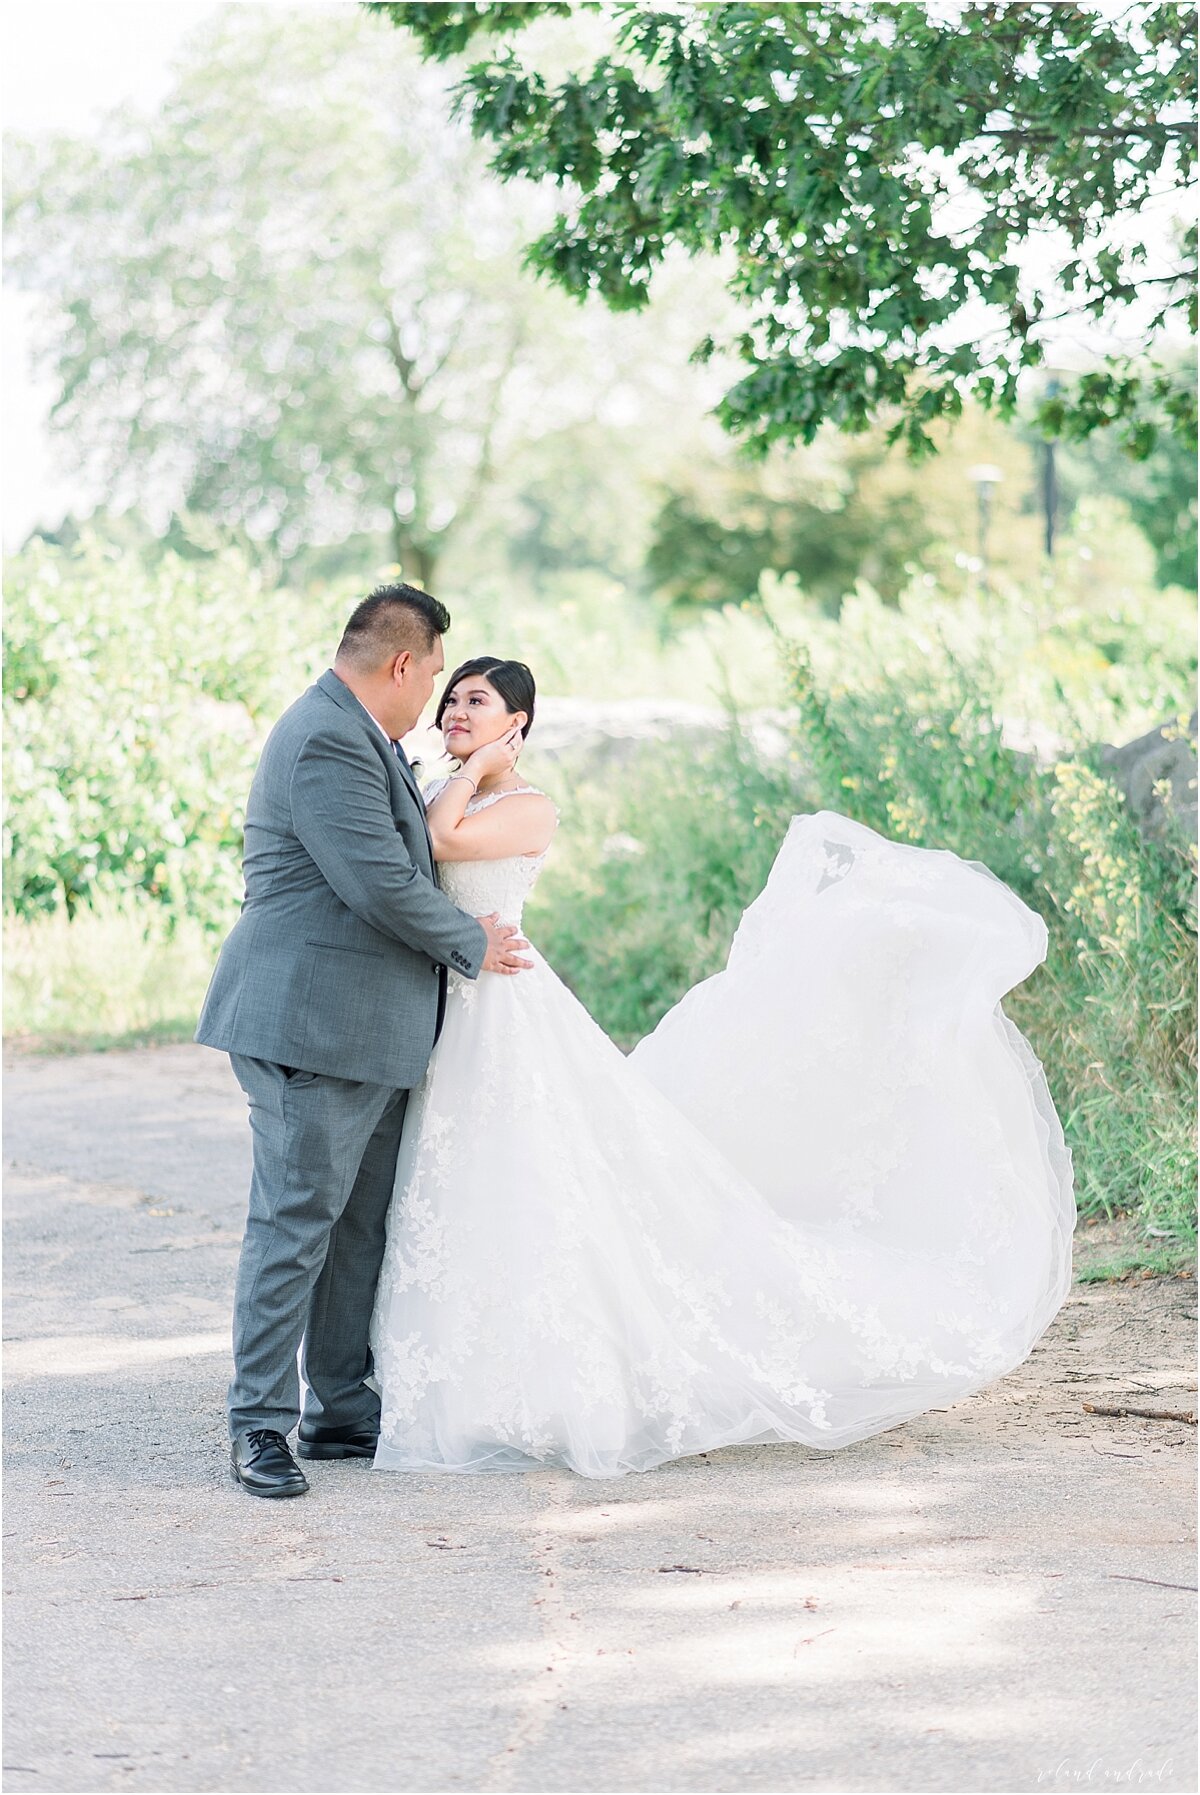 Light and Airy Wedding Photographer Chicago, Furama Chinese Wedding Photographer + Chicago Latino Photography + Naperville Wedding Photographer + Chicago Engagement Photographer + Best Photographer In Chicago_0047.jpg